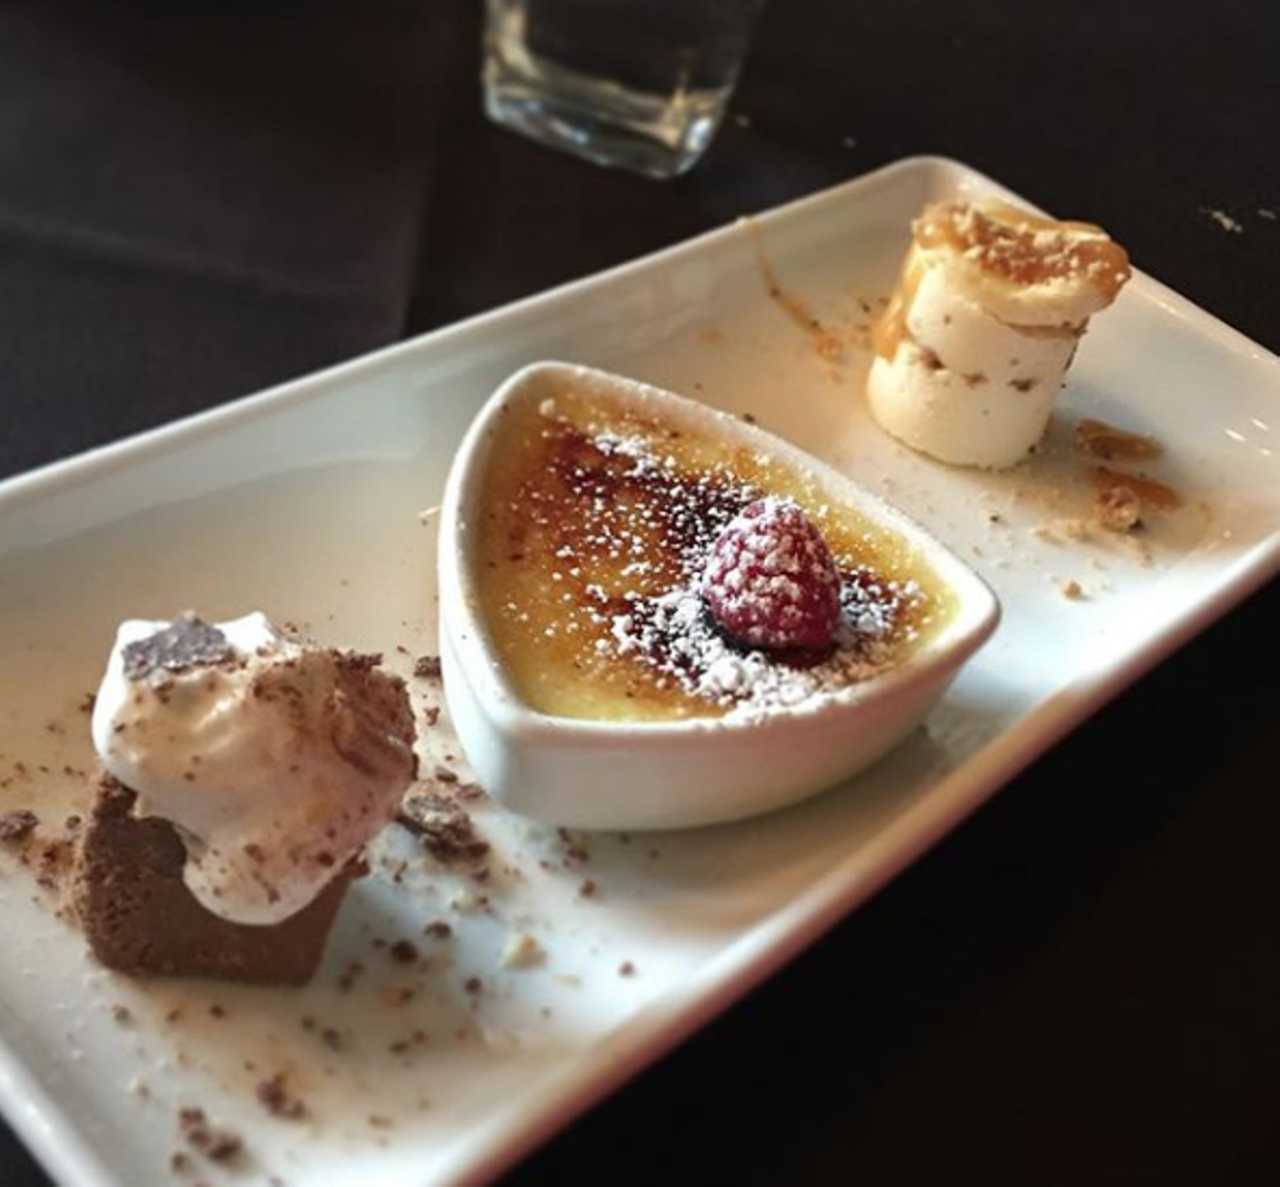 Perry’s Steakhouse & Grille
15900 La Cantera Pkwy #22200, (210) 558-6161, perryssteakhouse.com
You’ll want to join the email list just so you can score a free dessert trio on your birthday. Complete with vanilla bean crème brulée, Grand Marnier chocolate truffle and praline cheesecake, you won’t even need a birthday cake.
Photo via Instagram / kevinm40